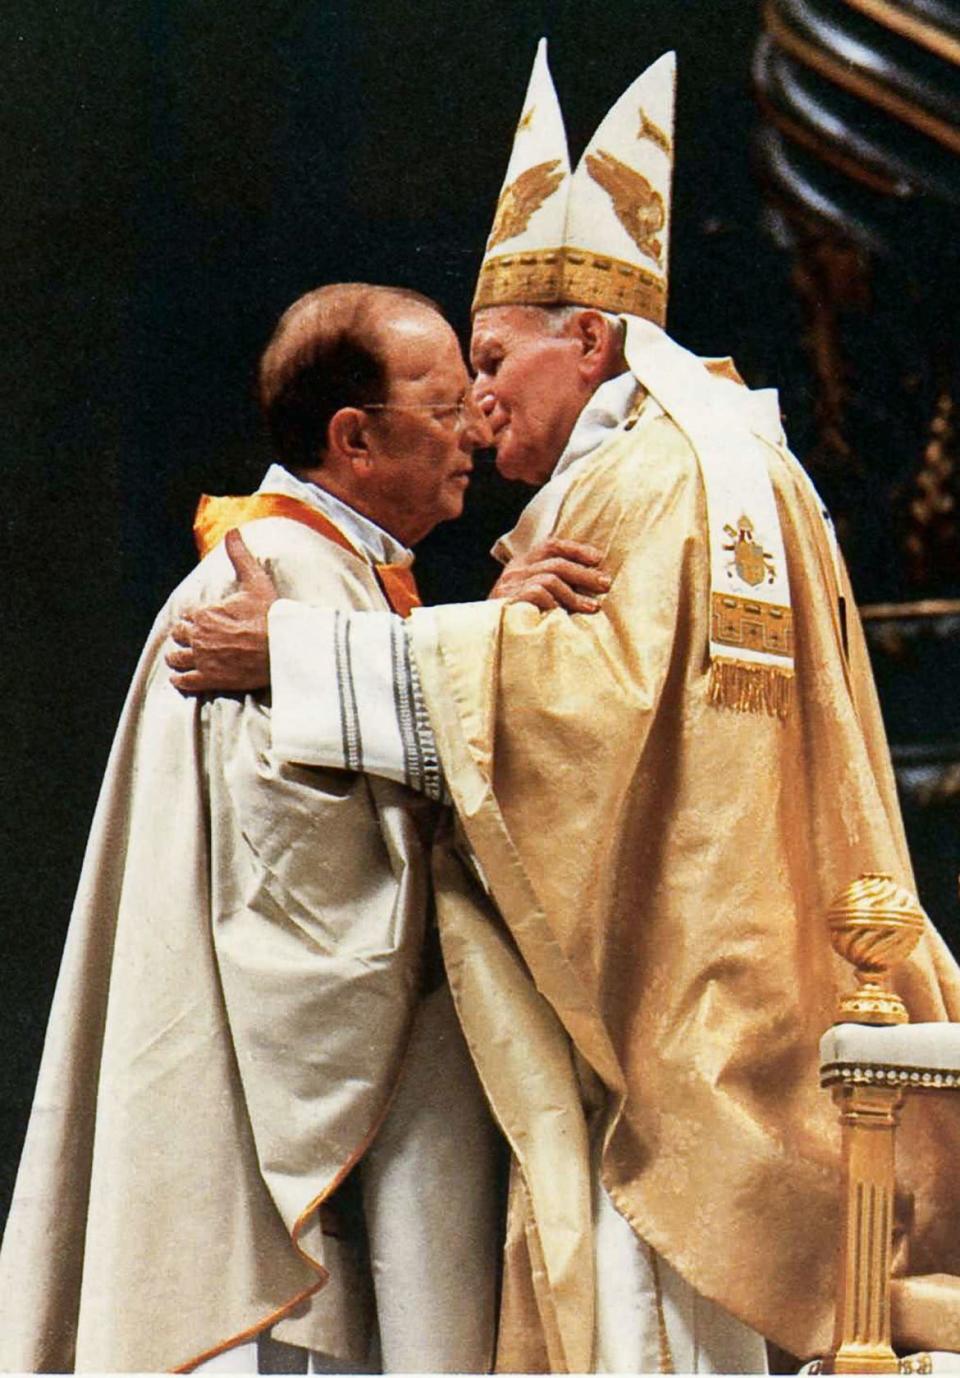 <div class="inline-image__caption"><p>The Mexican priest Marcial Maciel is embraced by Pope John Paul II in a ceremony marking the 50th anniversary of the Legion of Christ order, on Jan. 3, 1991. Maciel, who died in 2008, is thought to have been a serial pederast.</p></div> <div class="inline-image__credit">Maria Dipaola/MCT/Tribune News Service via Getty Images</div>